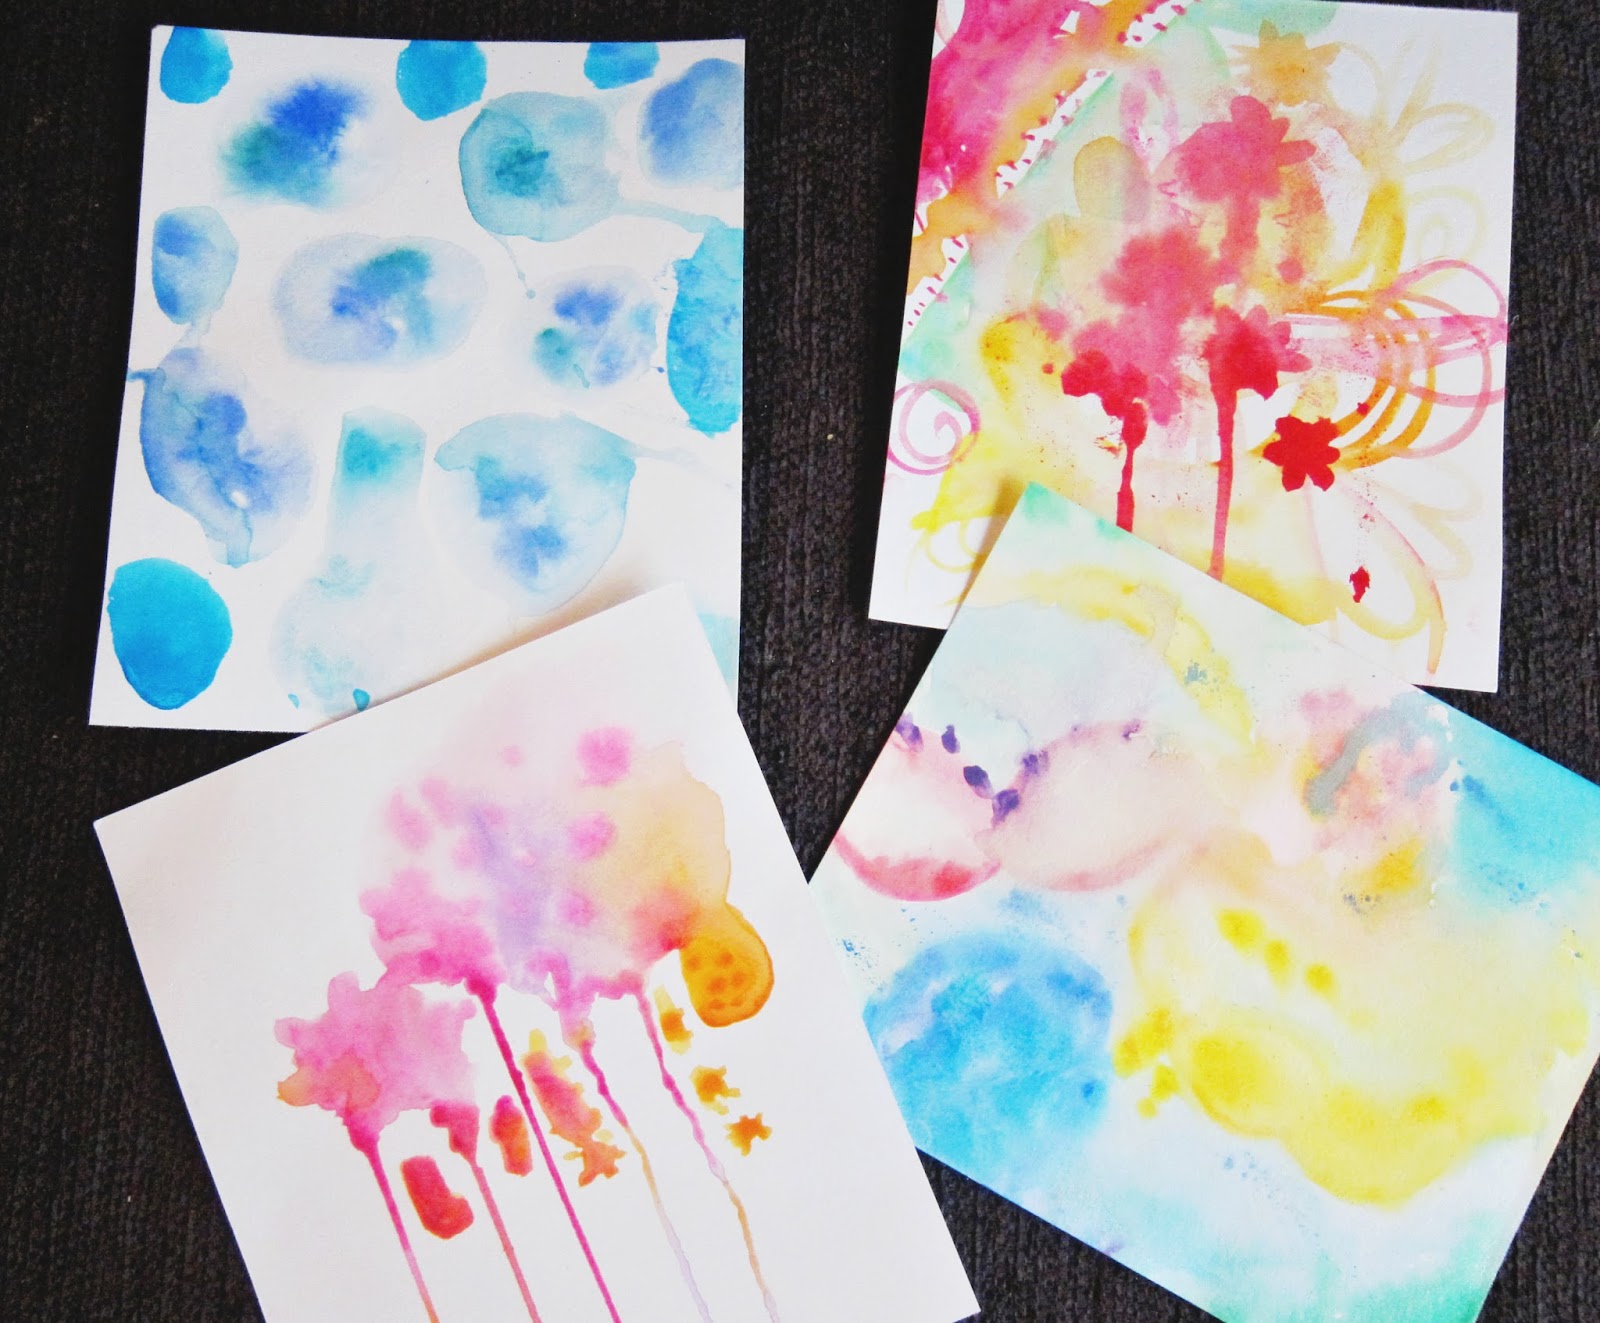 Painting Watercolor Backgrounds Marcia Beckett